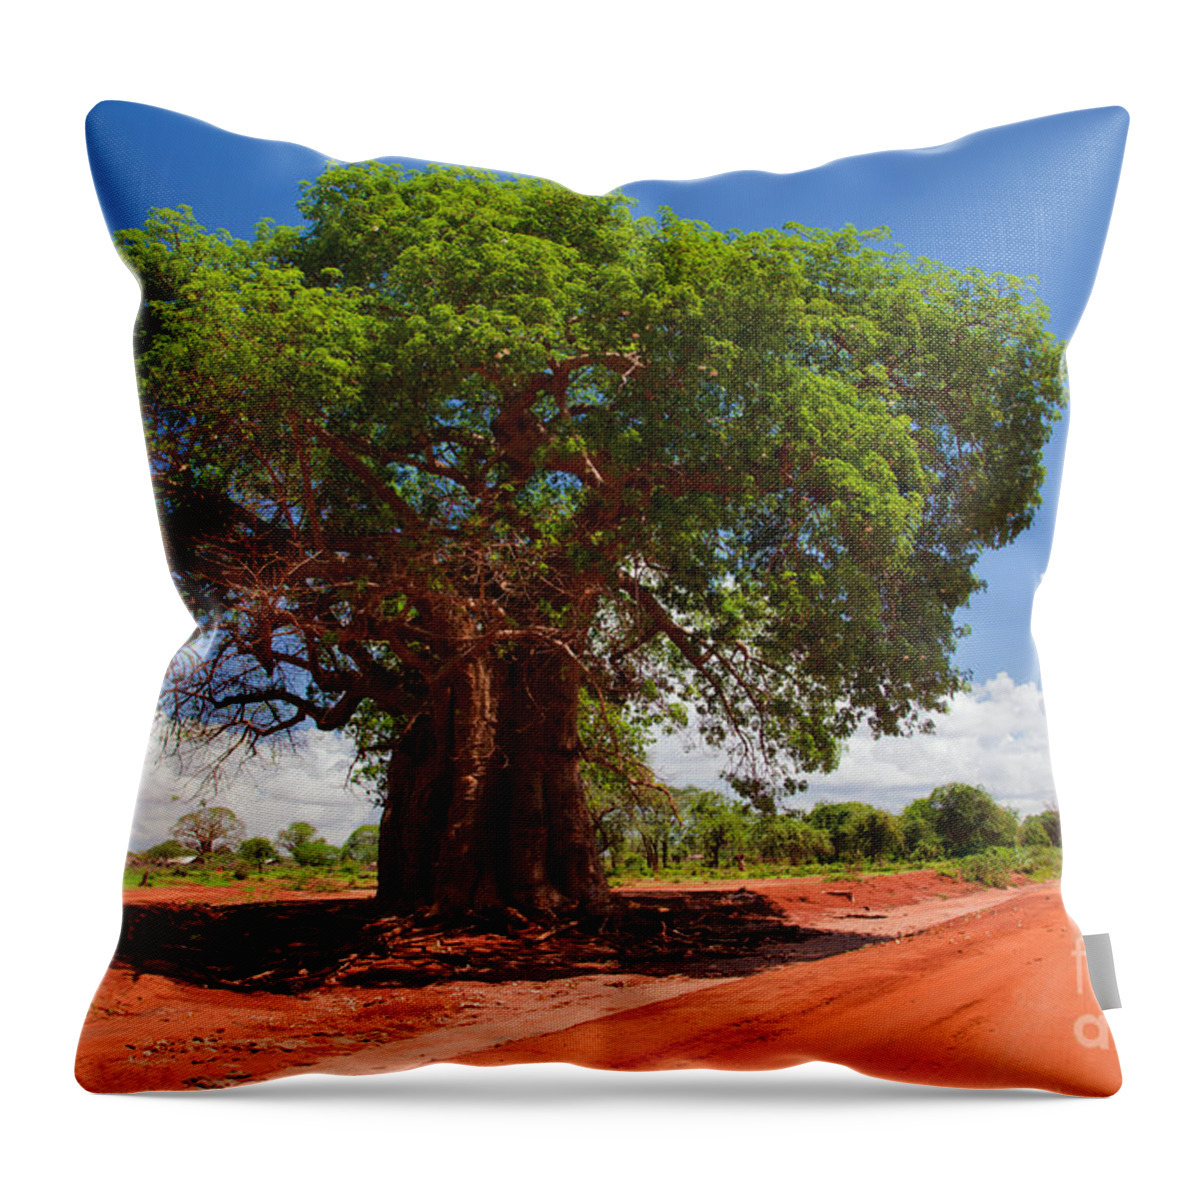 Kenya Throw Pillow featuring the photograph Baobab tree on red soil road by Michal Bednarek